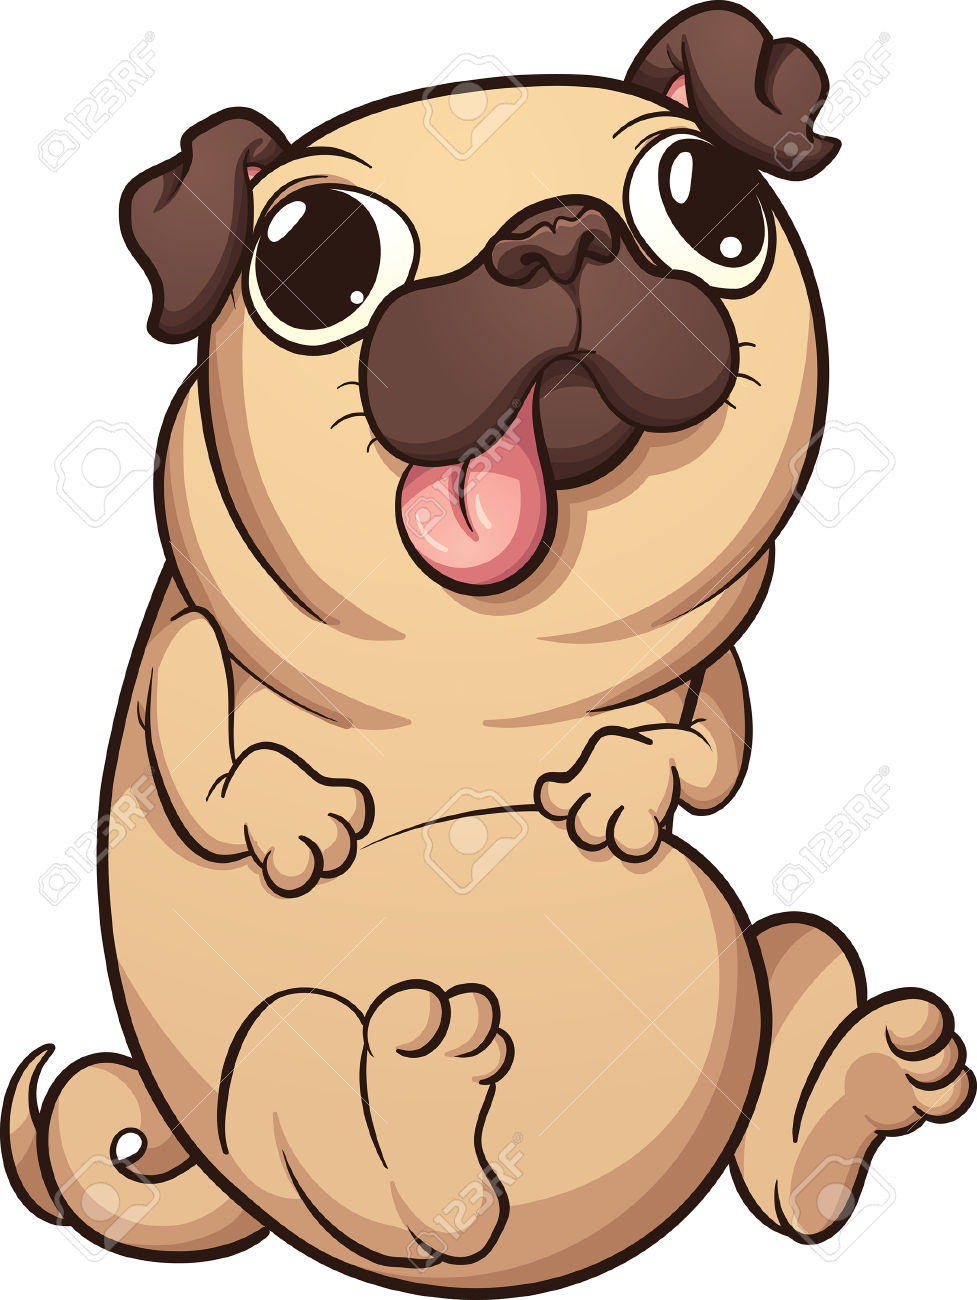 Pug clipart #5, Download drawings